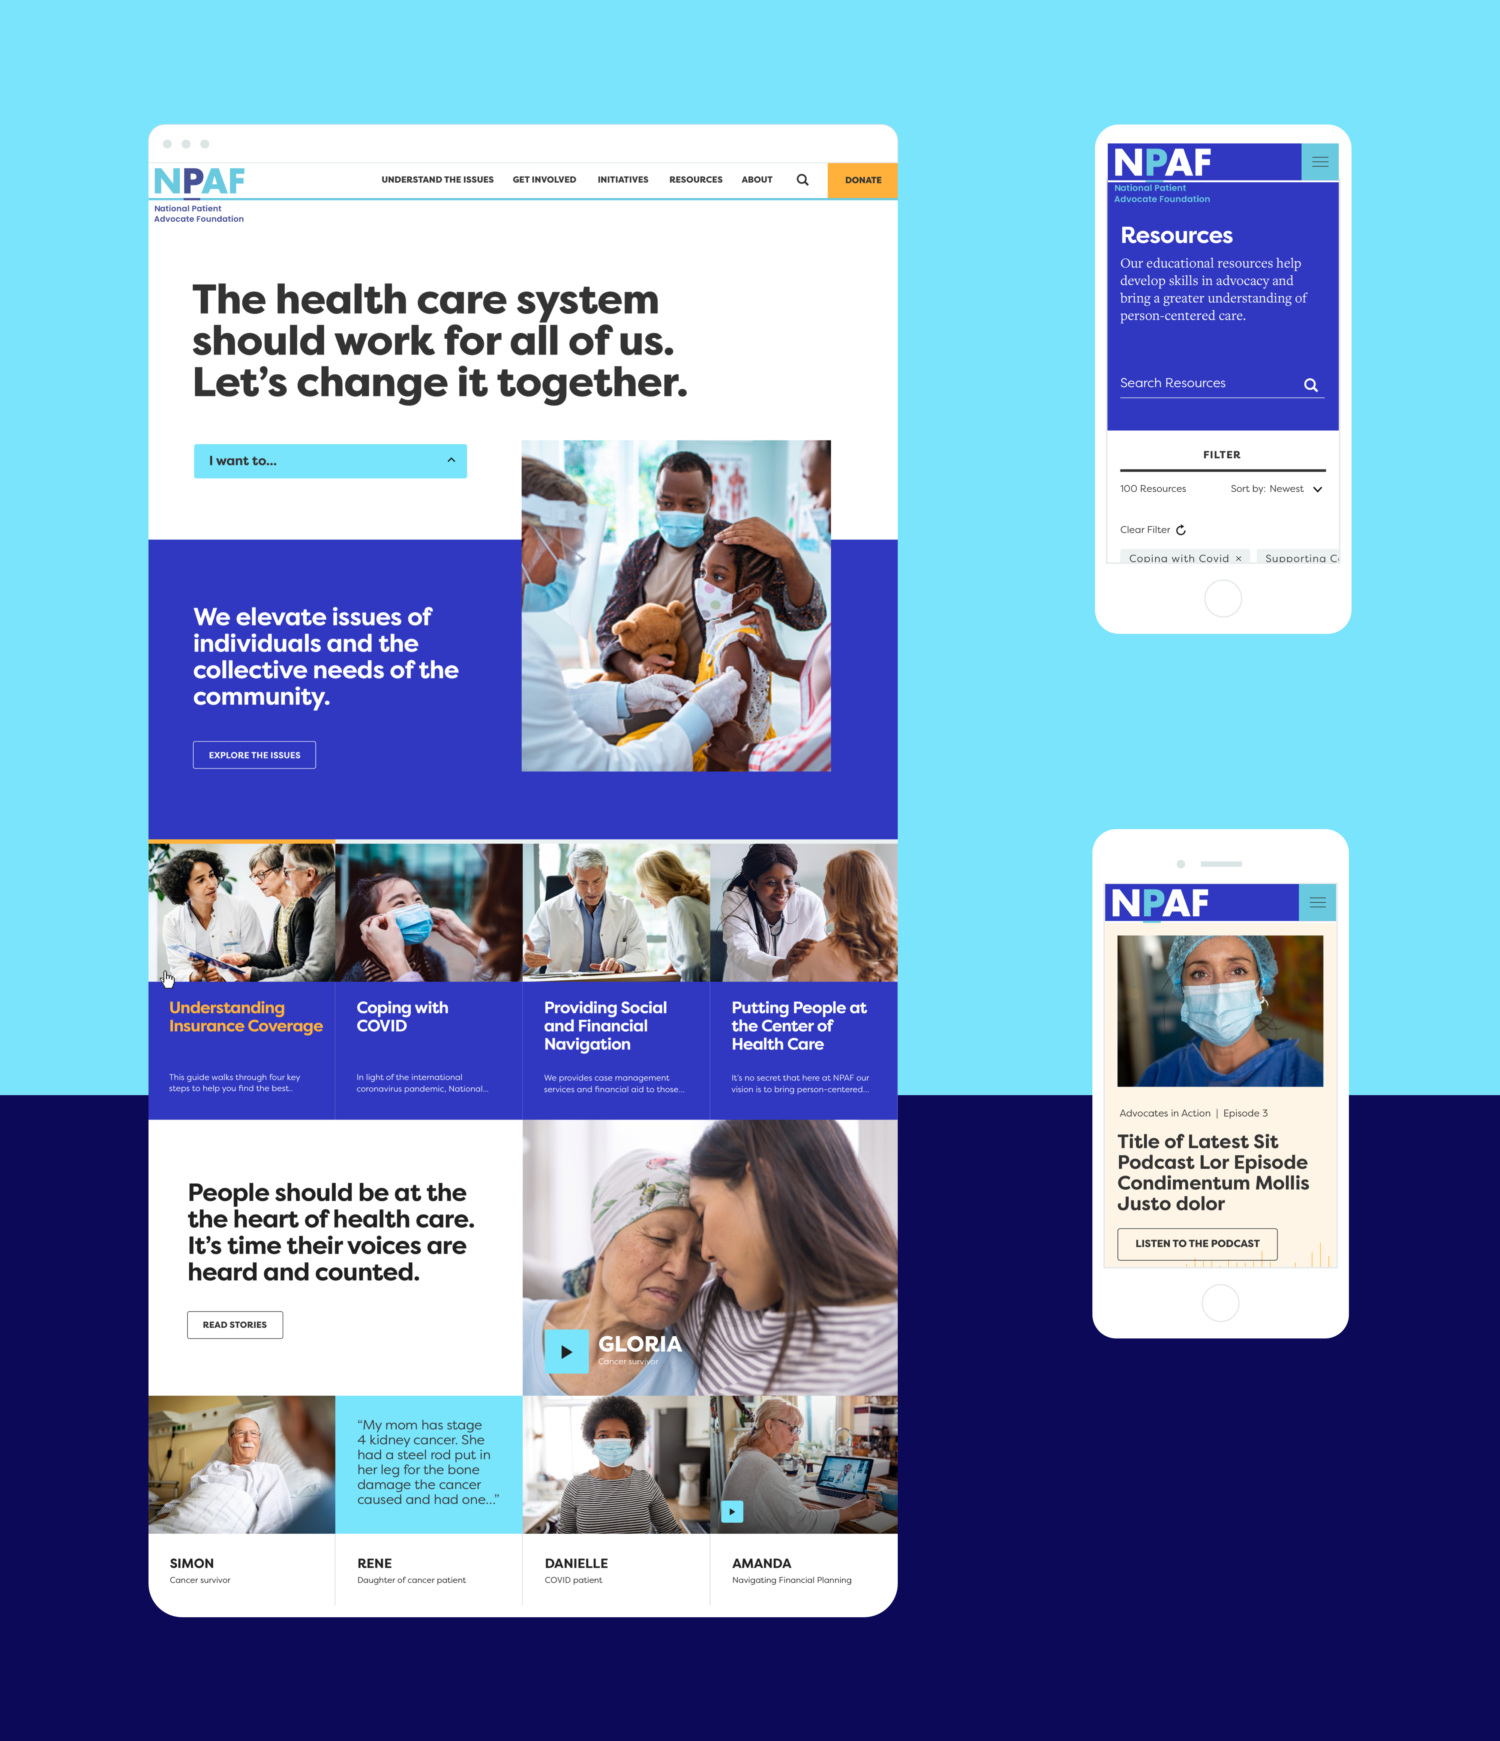 Homepage displaying NPAF's vision of a the health care system should work for all of us through displaying key issues and patient stories.